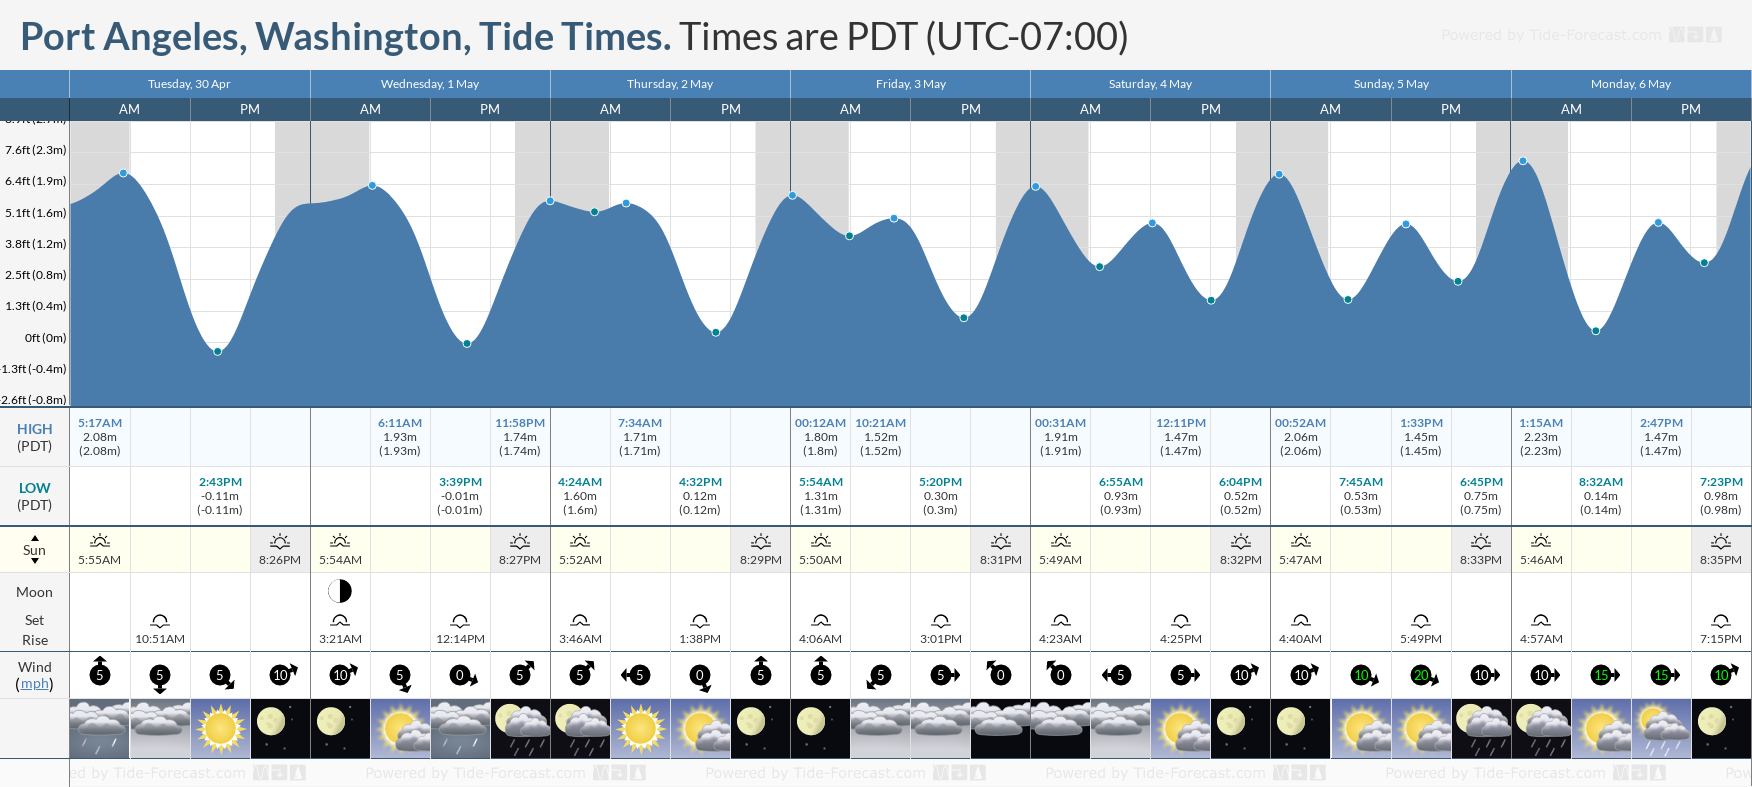 Port Angeles, Washington Tide Chart including high and low tide tide times for the next 7 days